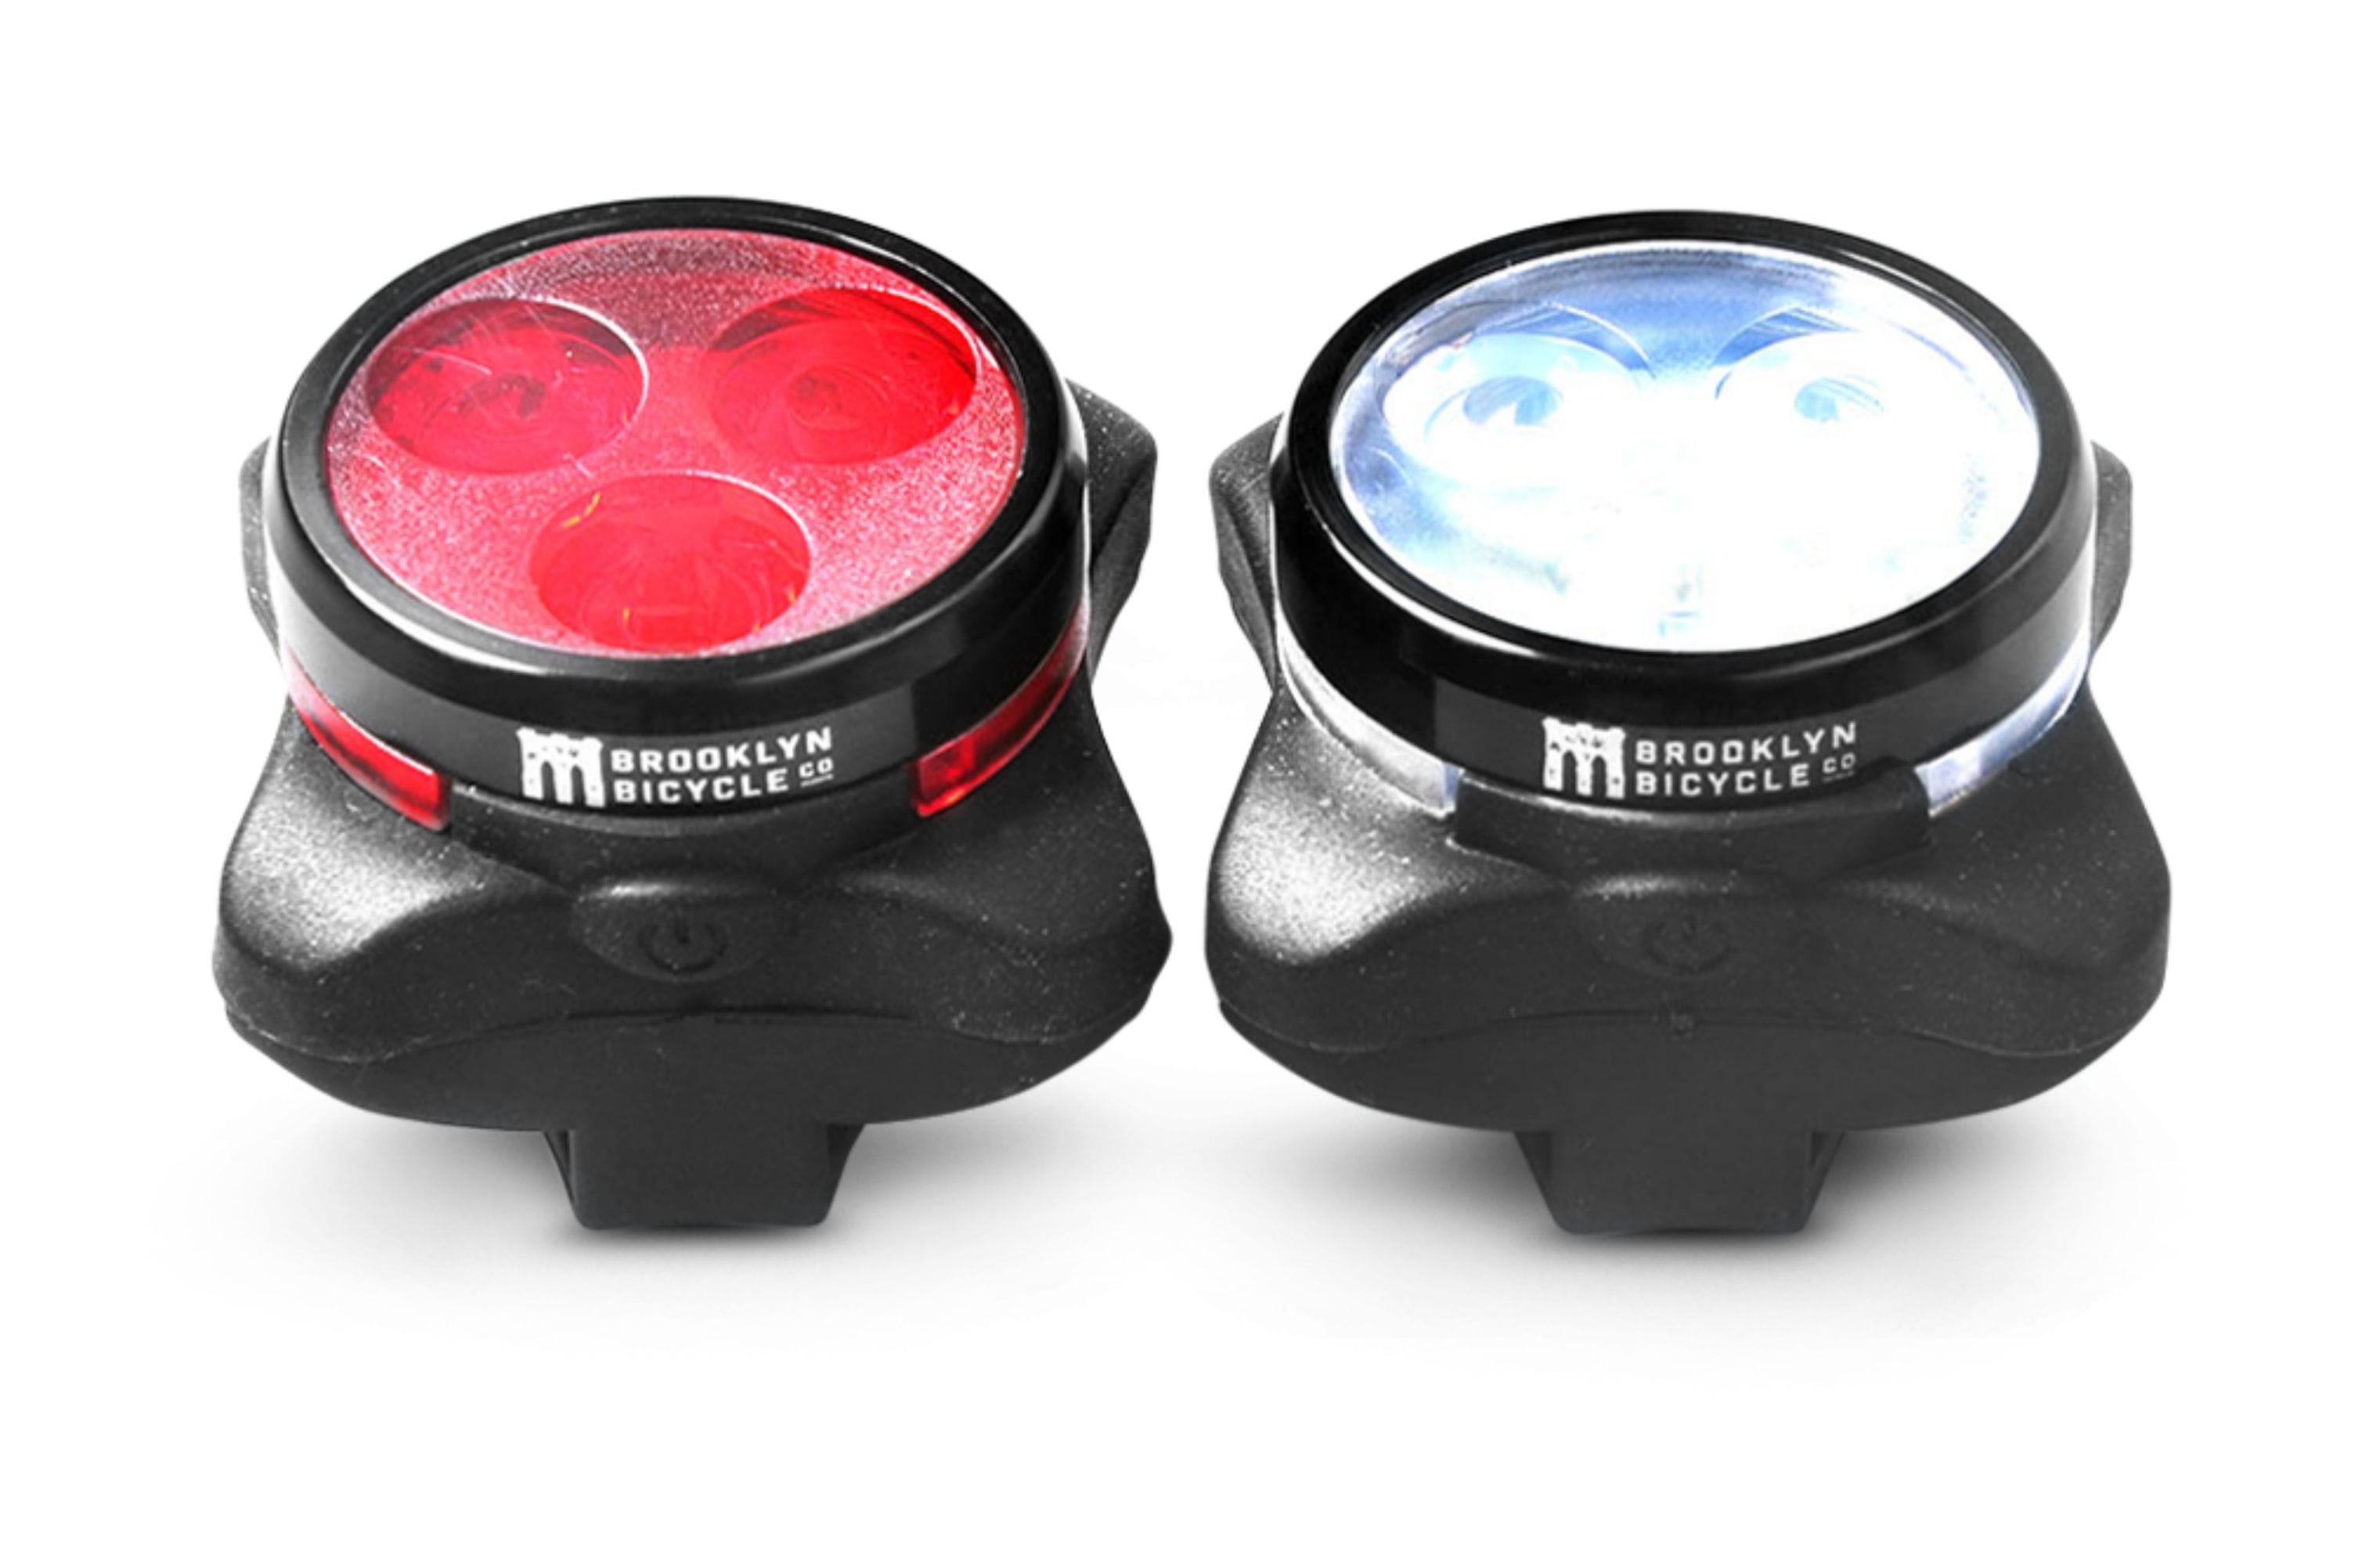 Brightest Bike Lights | USB Rechargeable Lights | Bicycle Co.